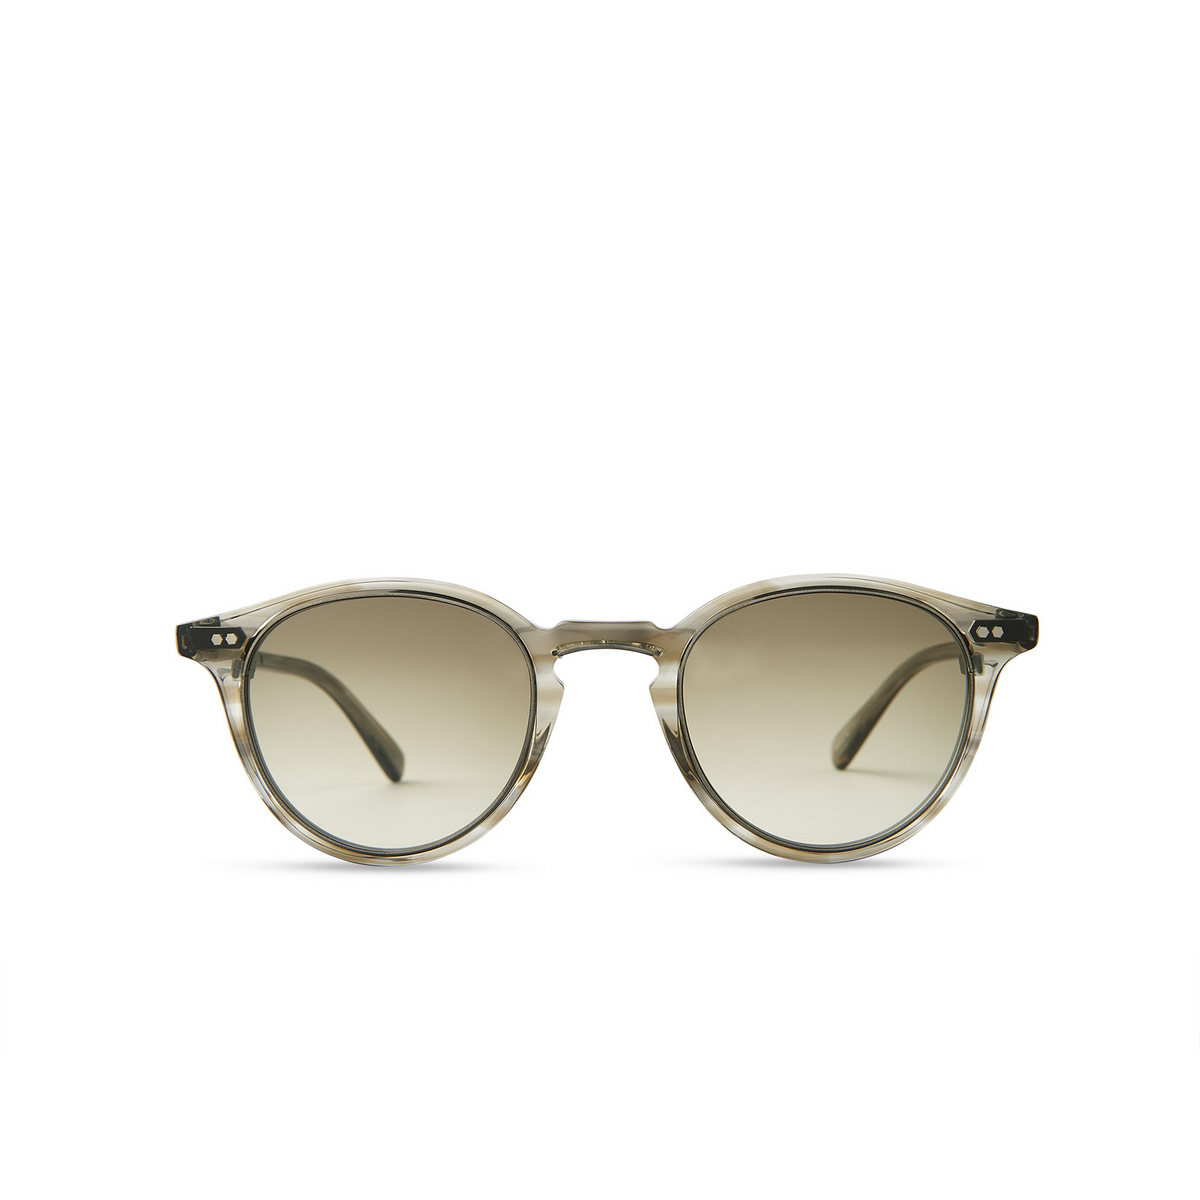 Mr. Leight MARMONT II S Sunglasses CSTGRY-PW/FERNG Celestial Grey-Pewter - front view